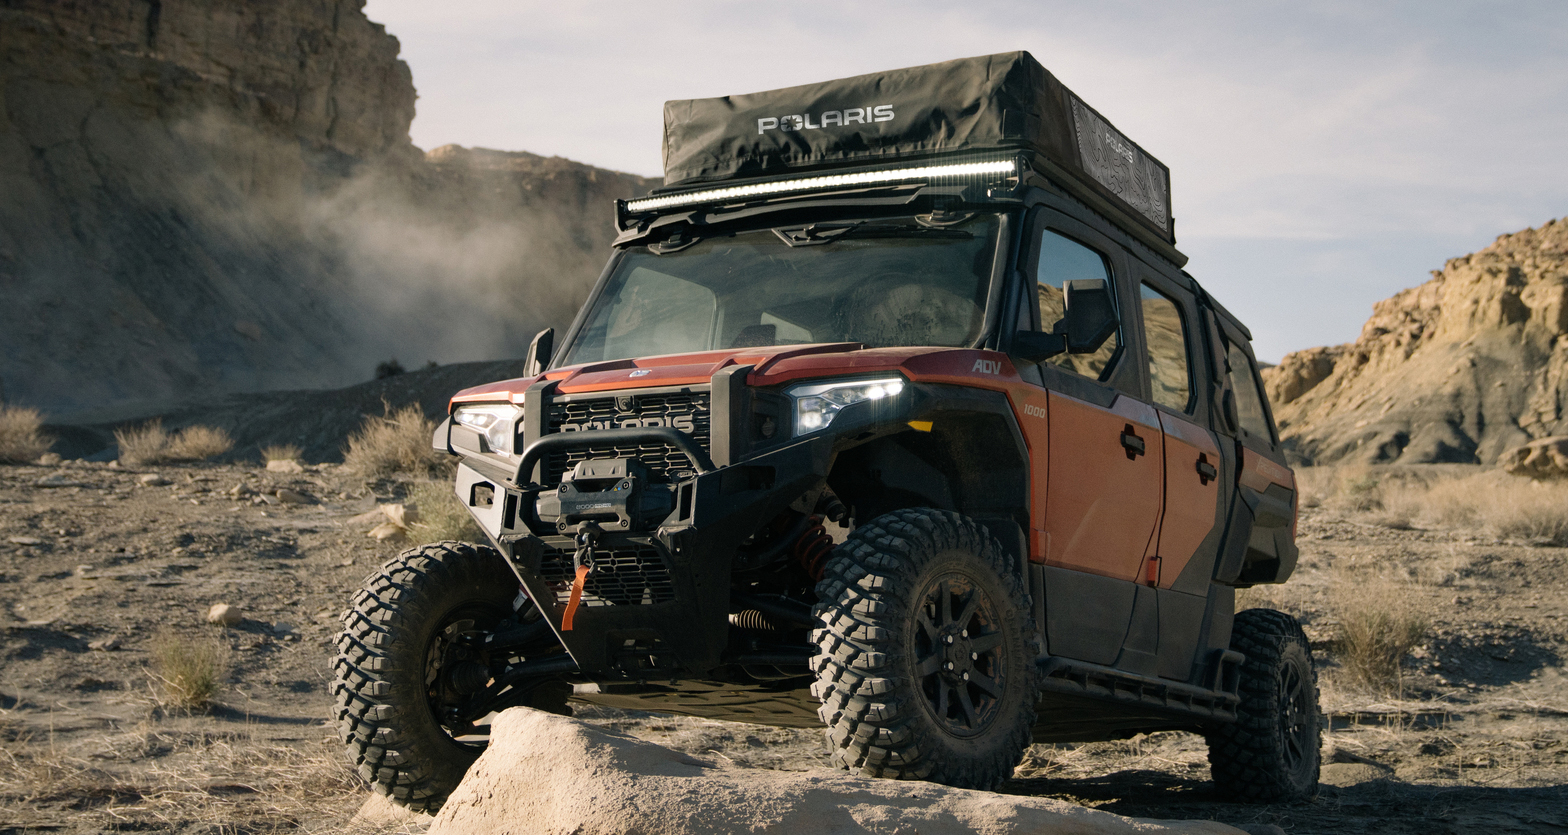 Polaris unveils XPEDITION models, new category of adventure UTVs